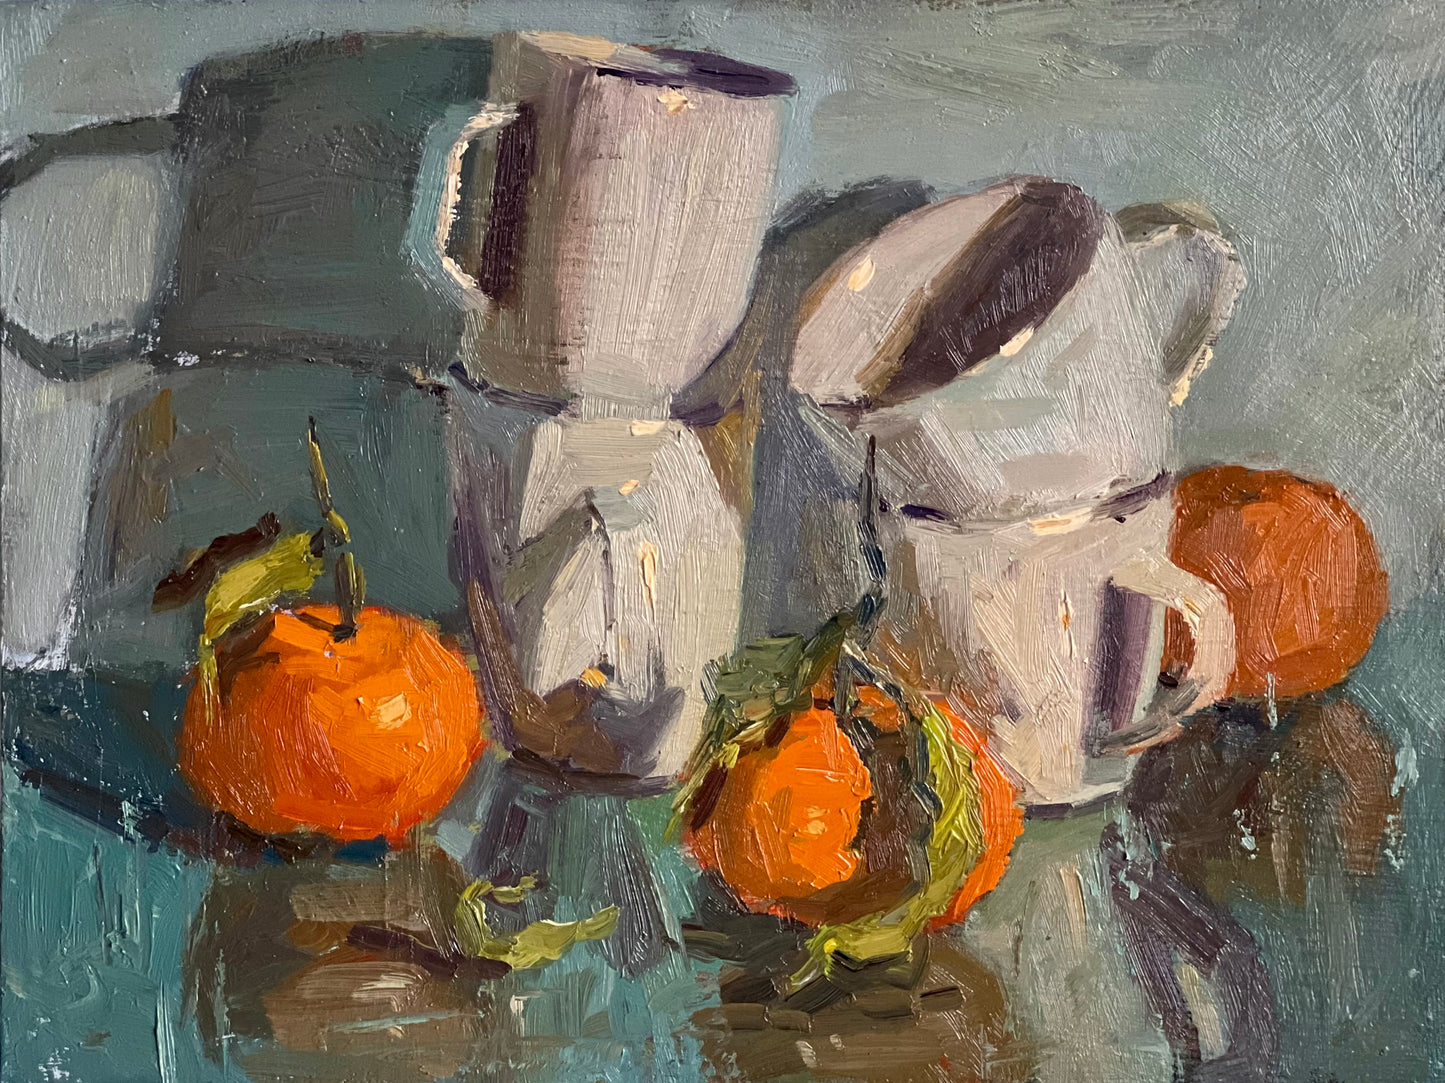 Oranges and Teacups - Still Life Oil Painting